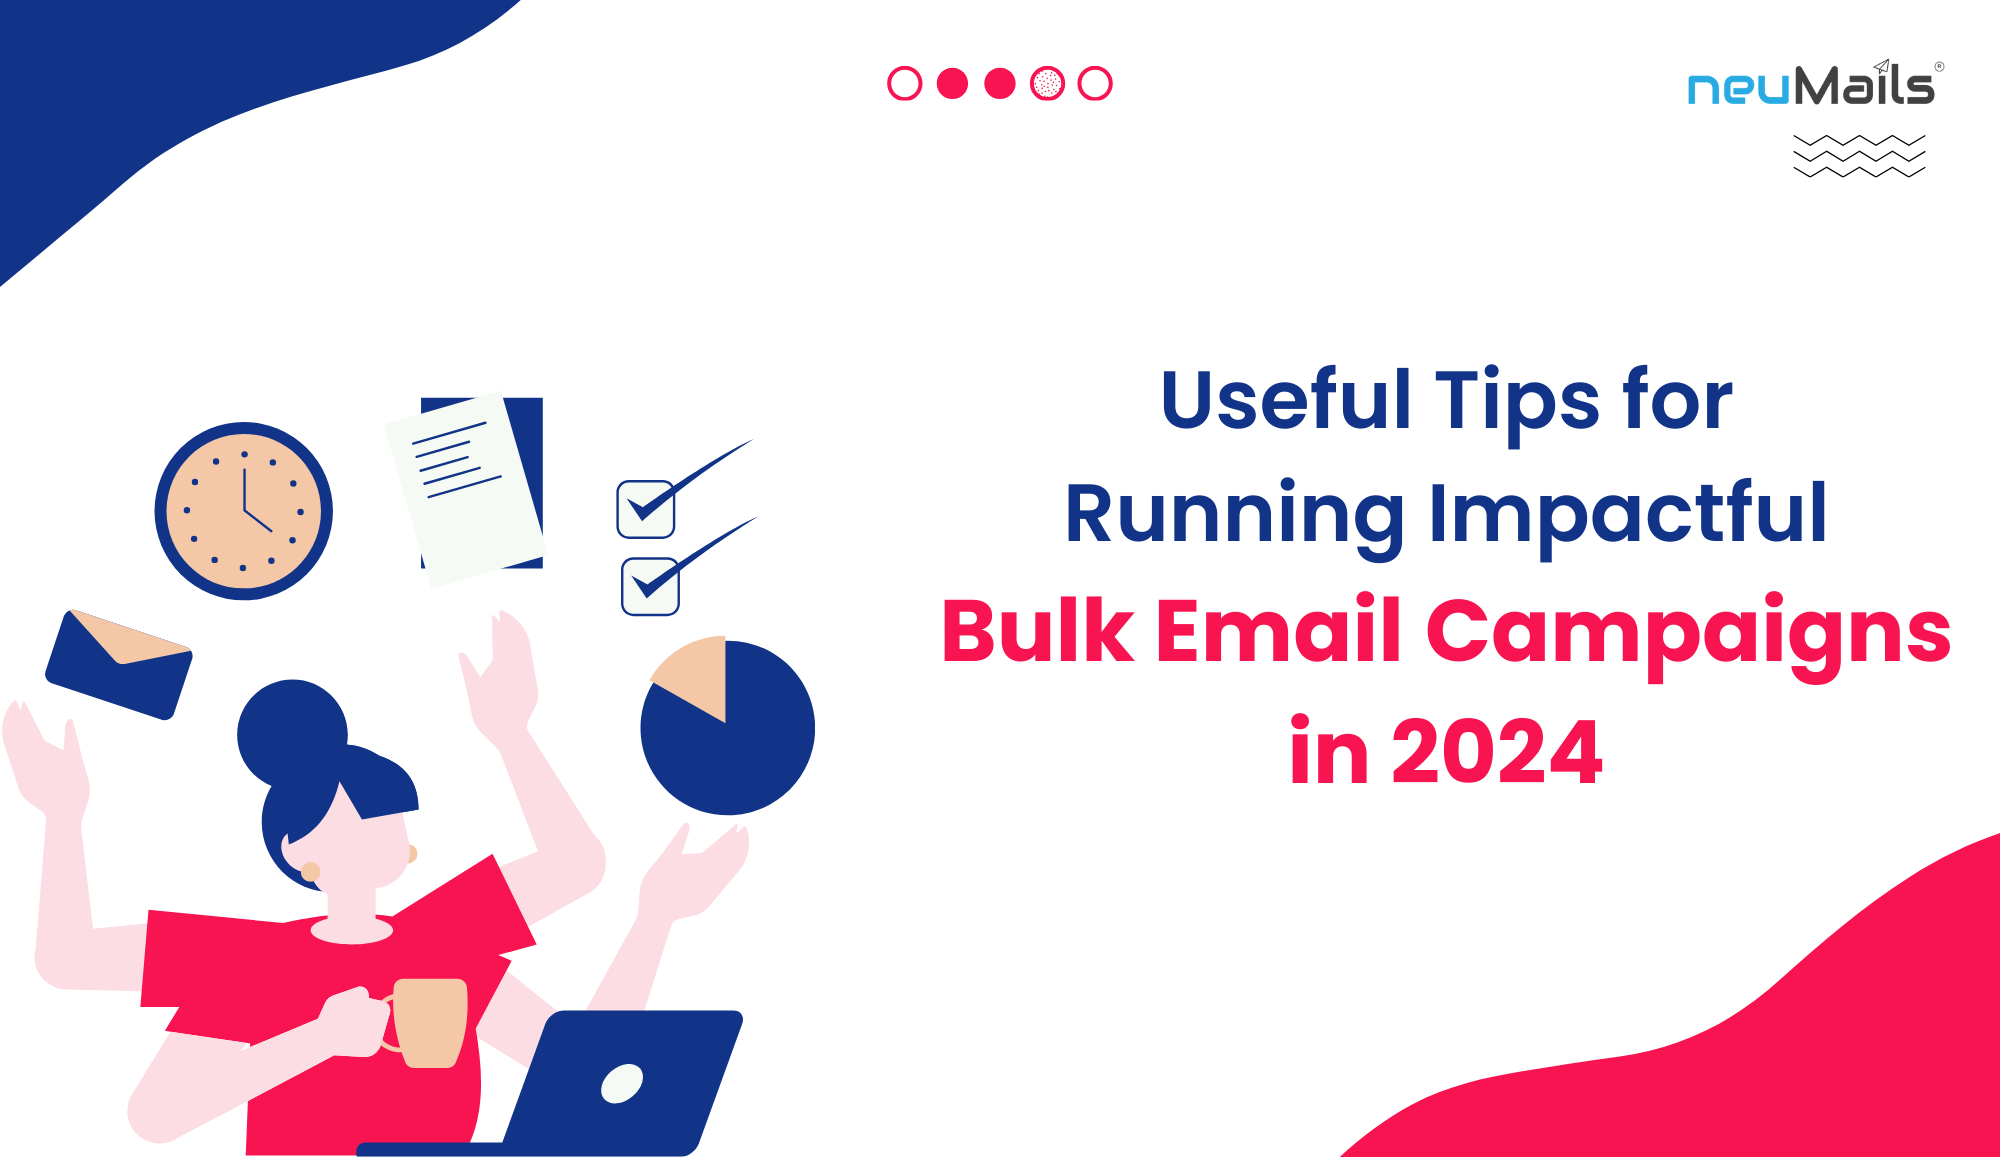 bulk_email_campaigns_neumails